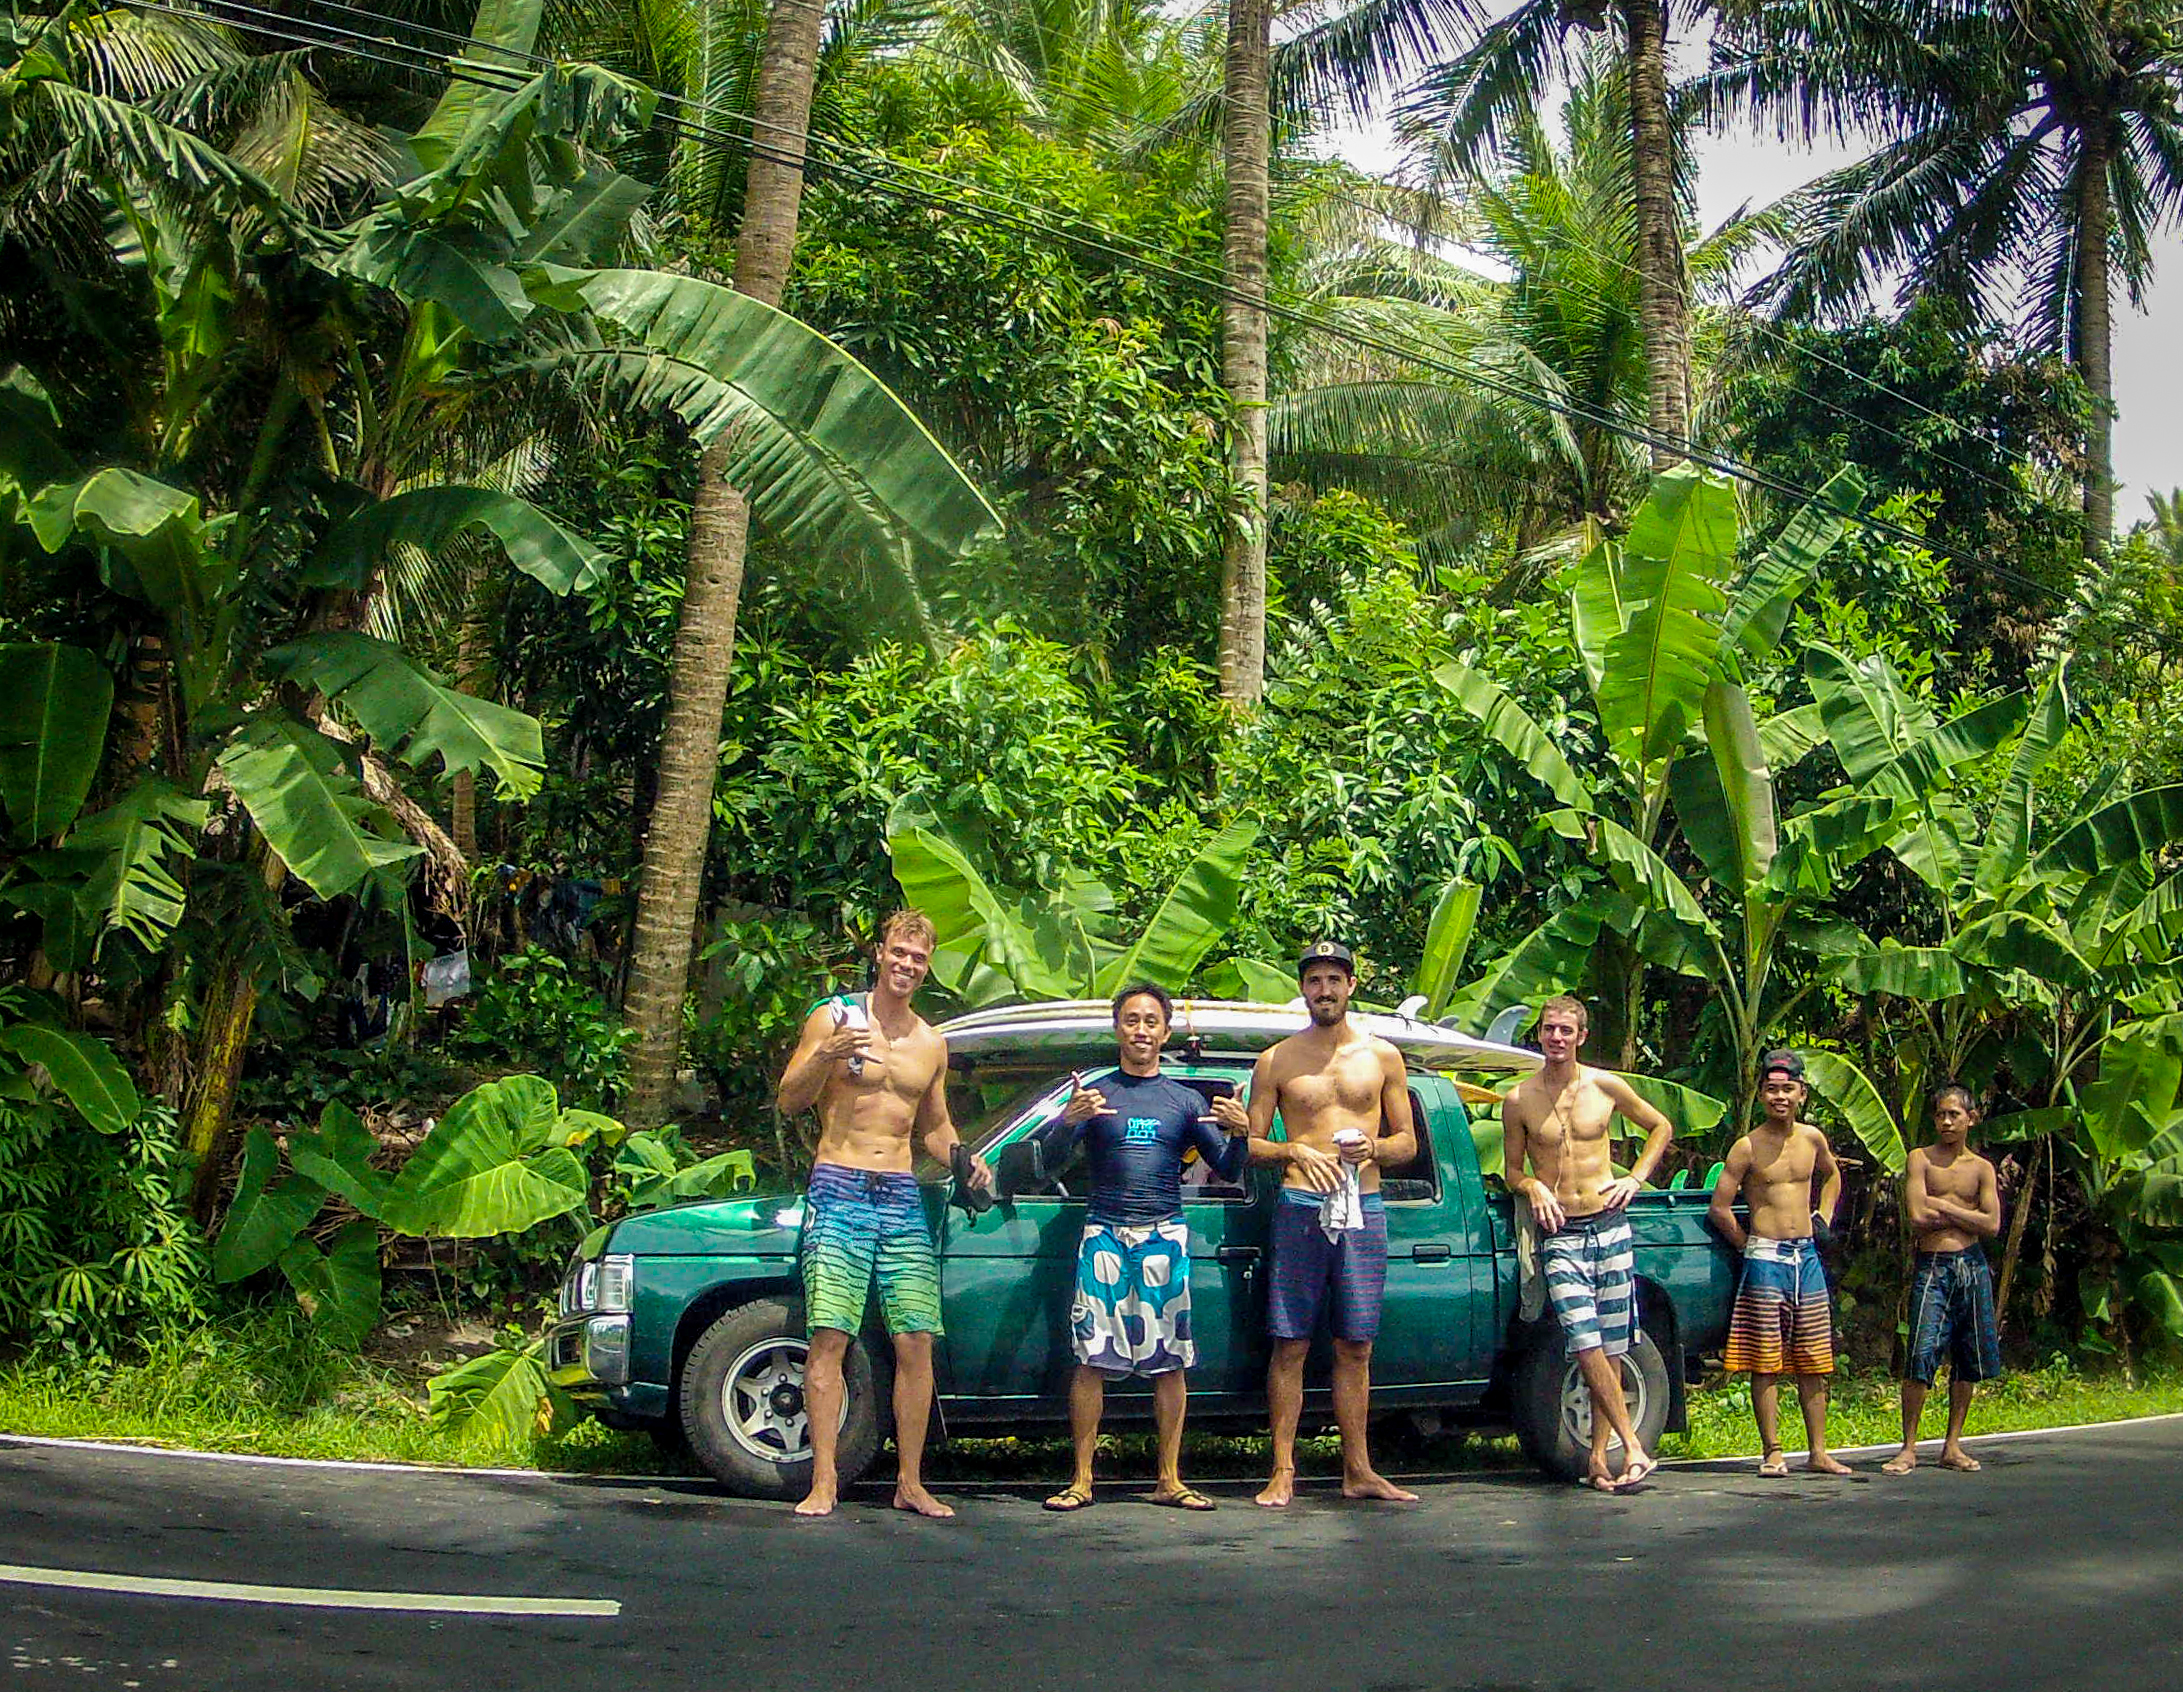 After surfing one of the local reefs. From L to R: Me, Bidge, Momo, Coco, Ayie, Marco